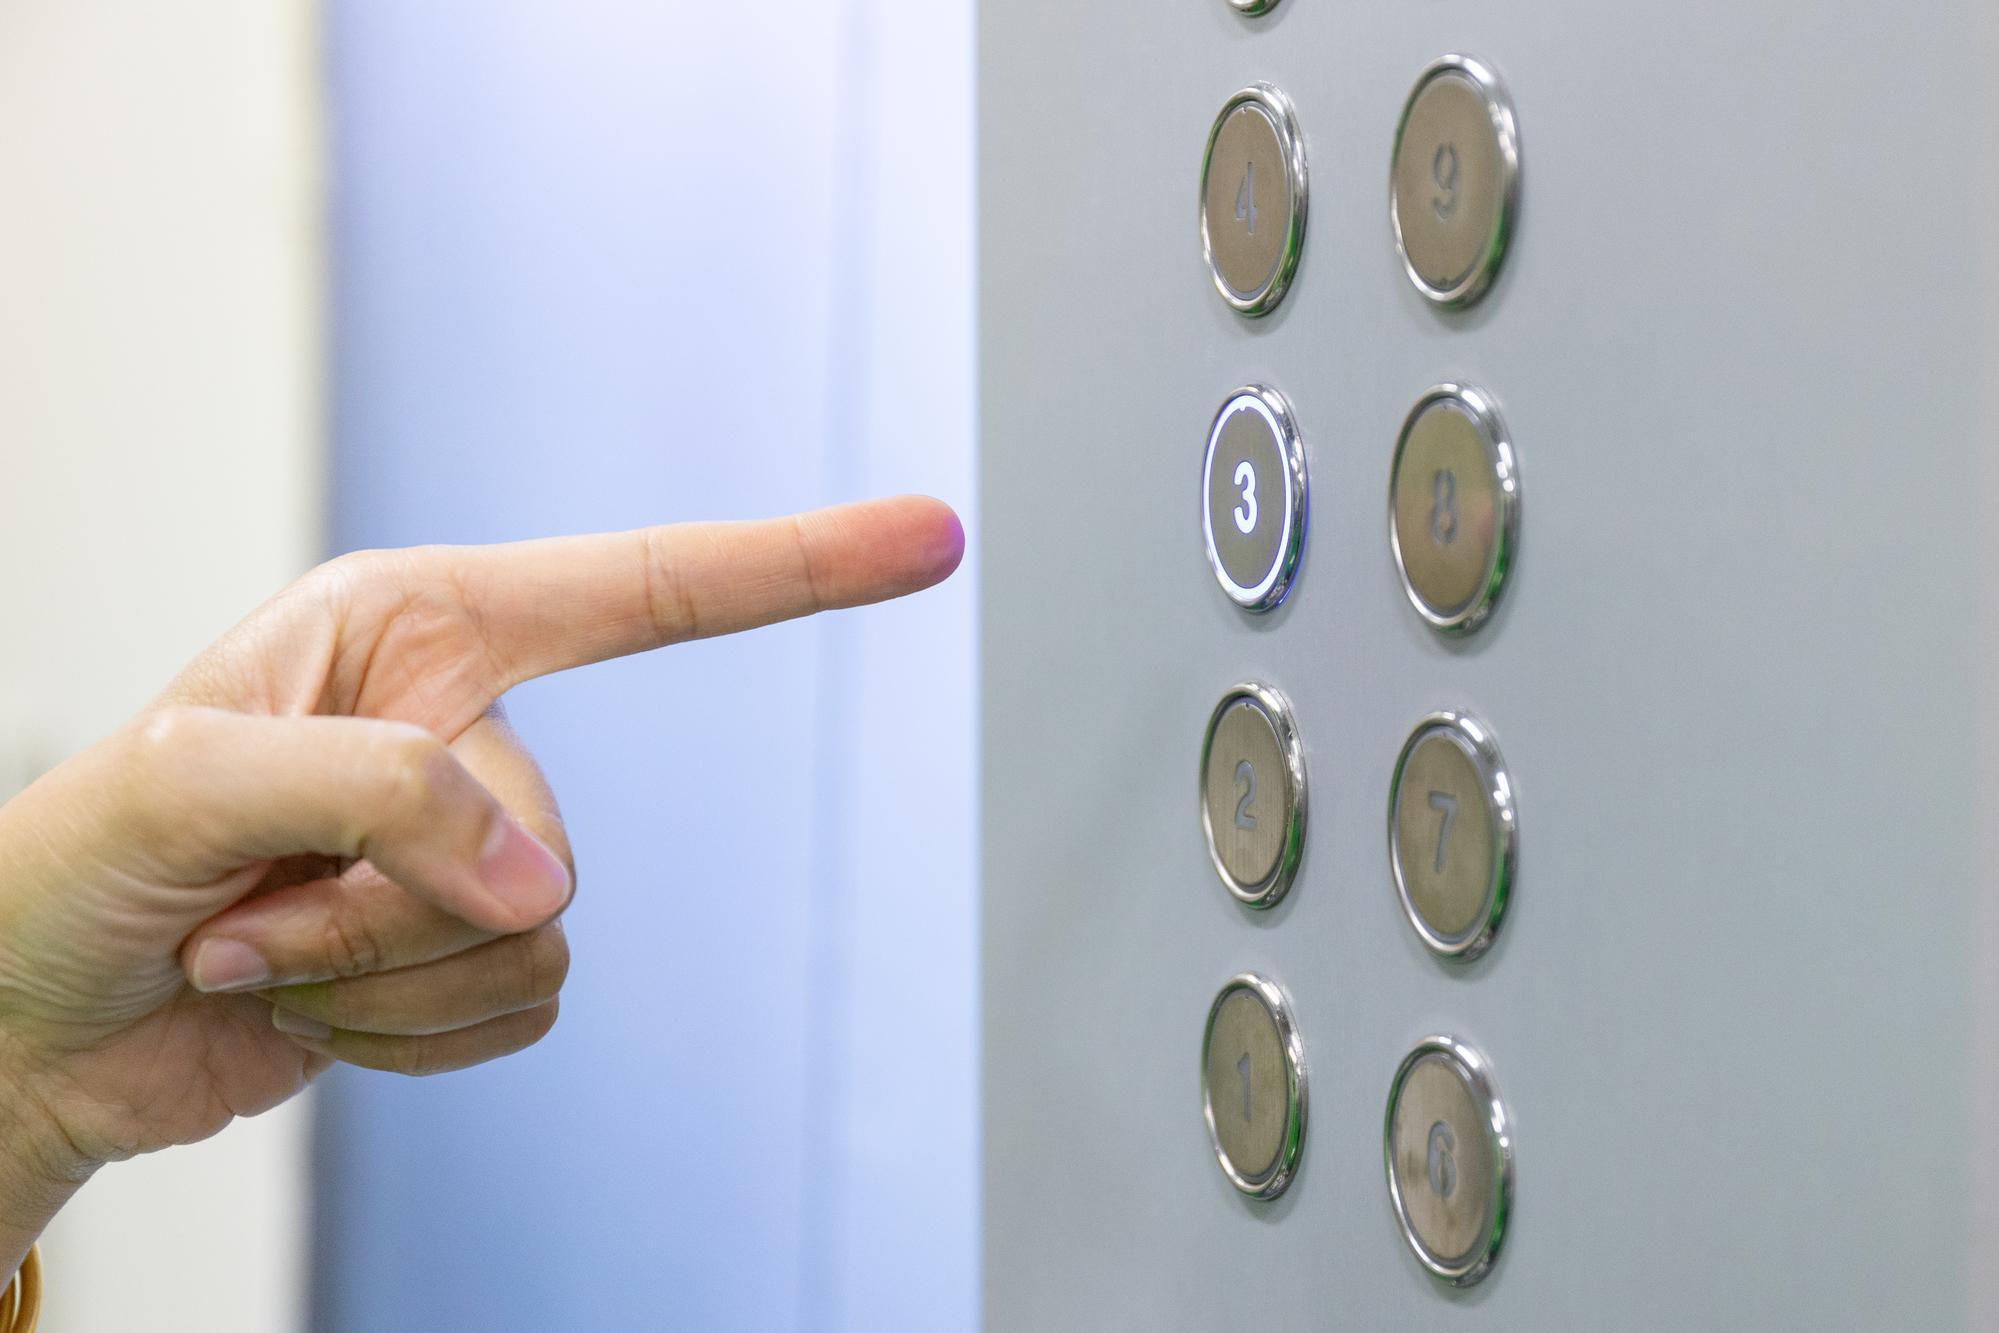 Fingers can be detected within a 5-centimeter range and activate the elevator buttons.